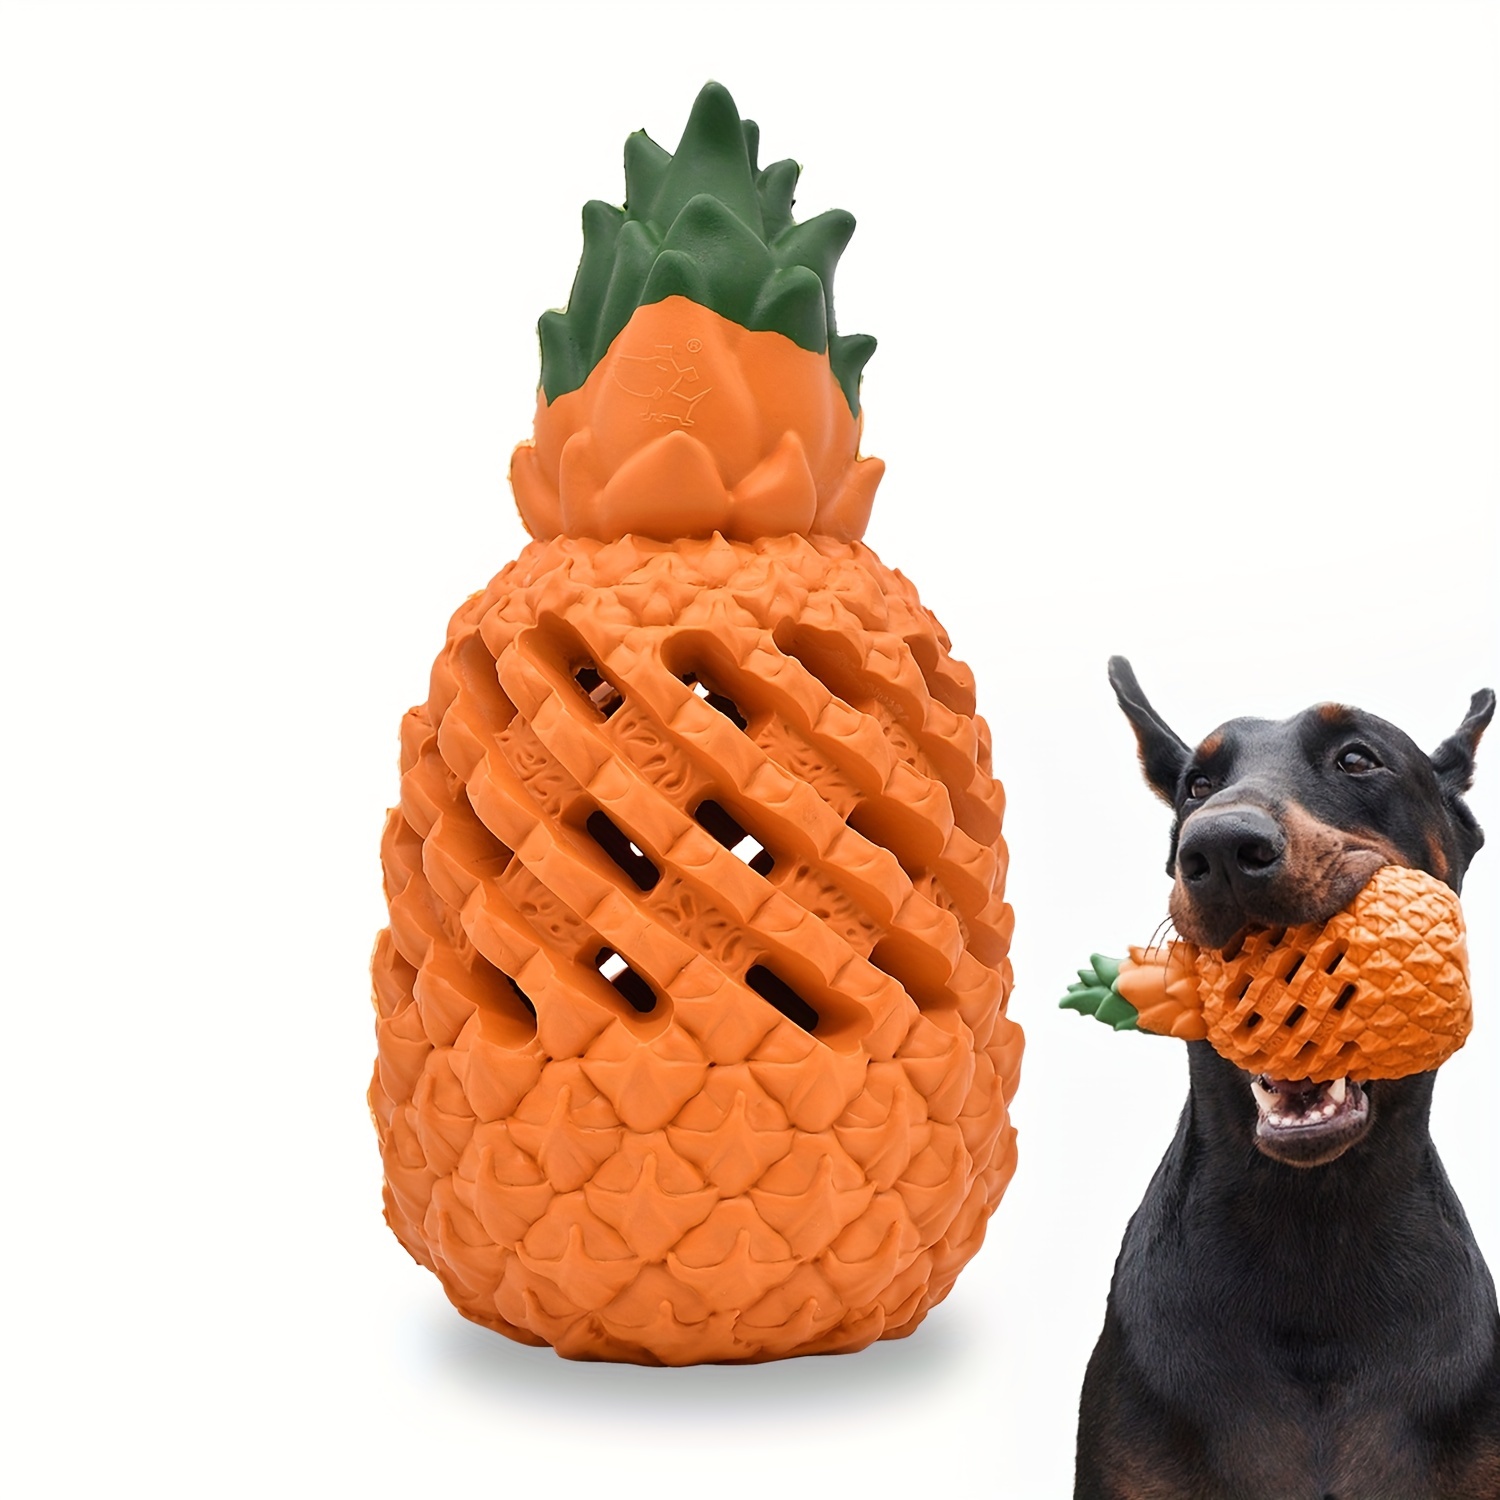 Indestructible Dog Chew Toys for Aggressive Chewers Large Breed